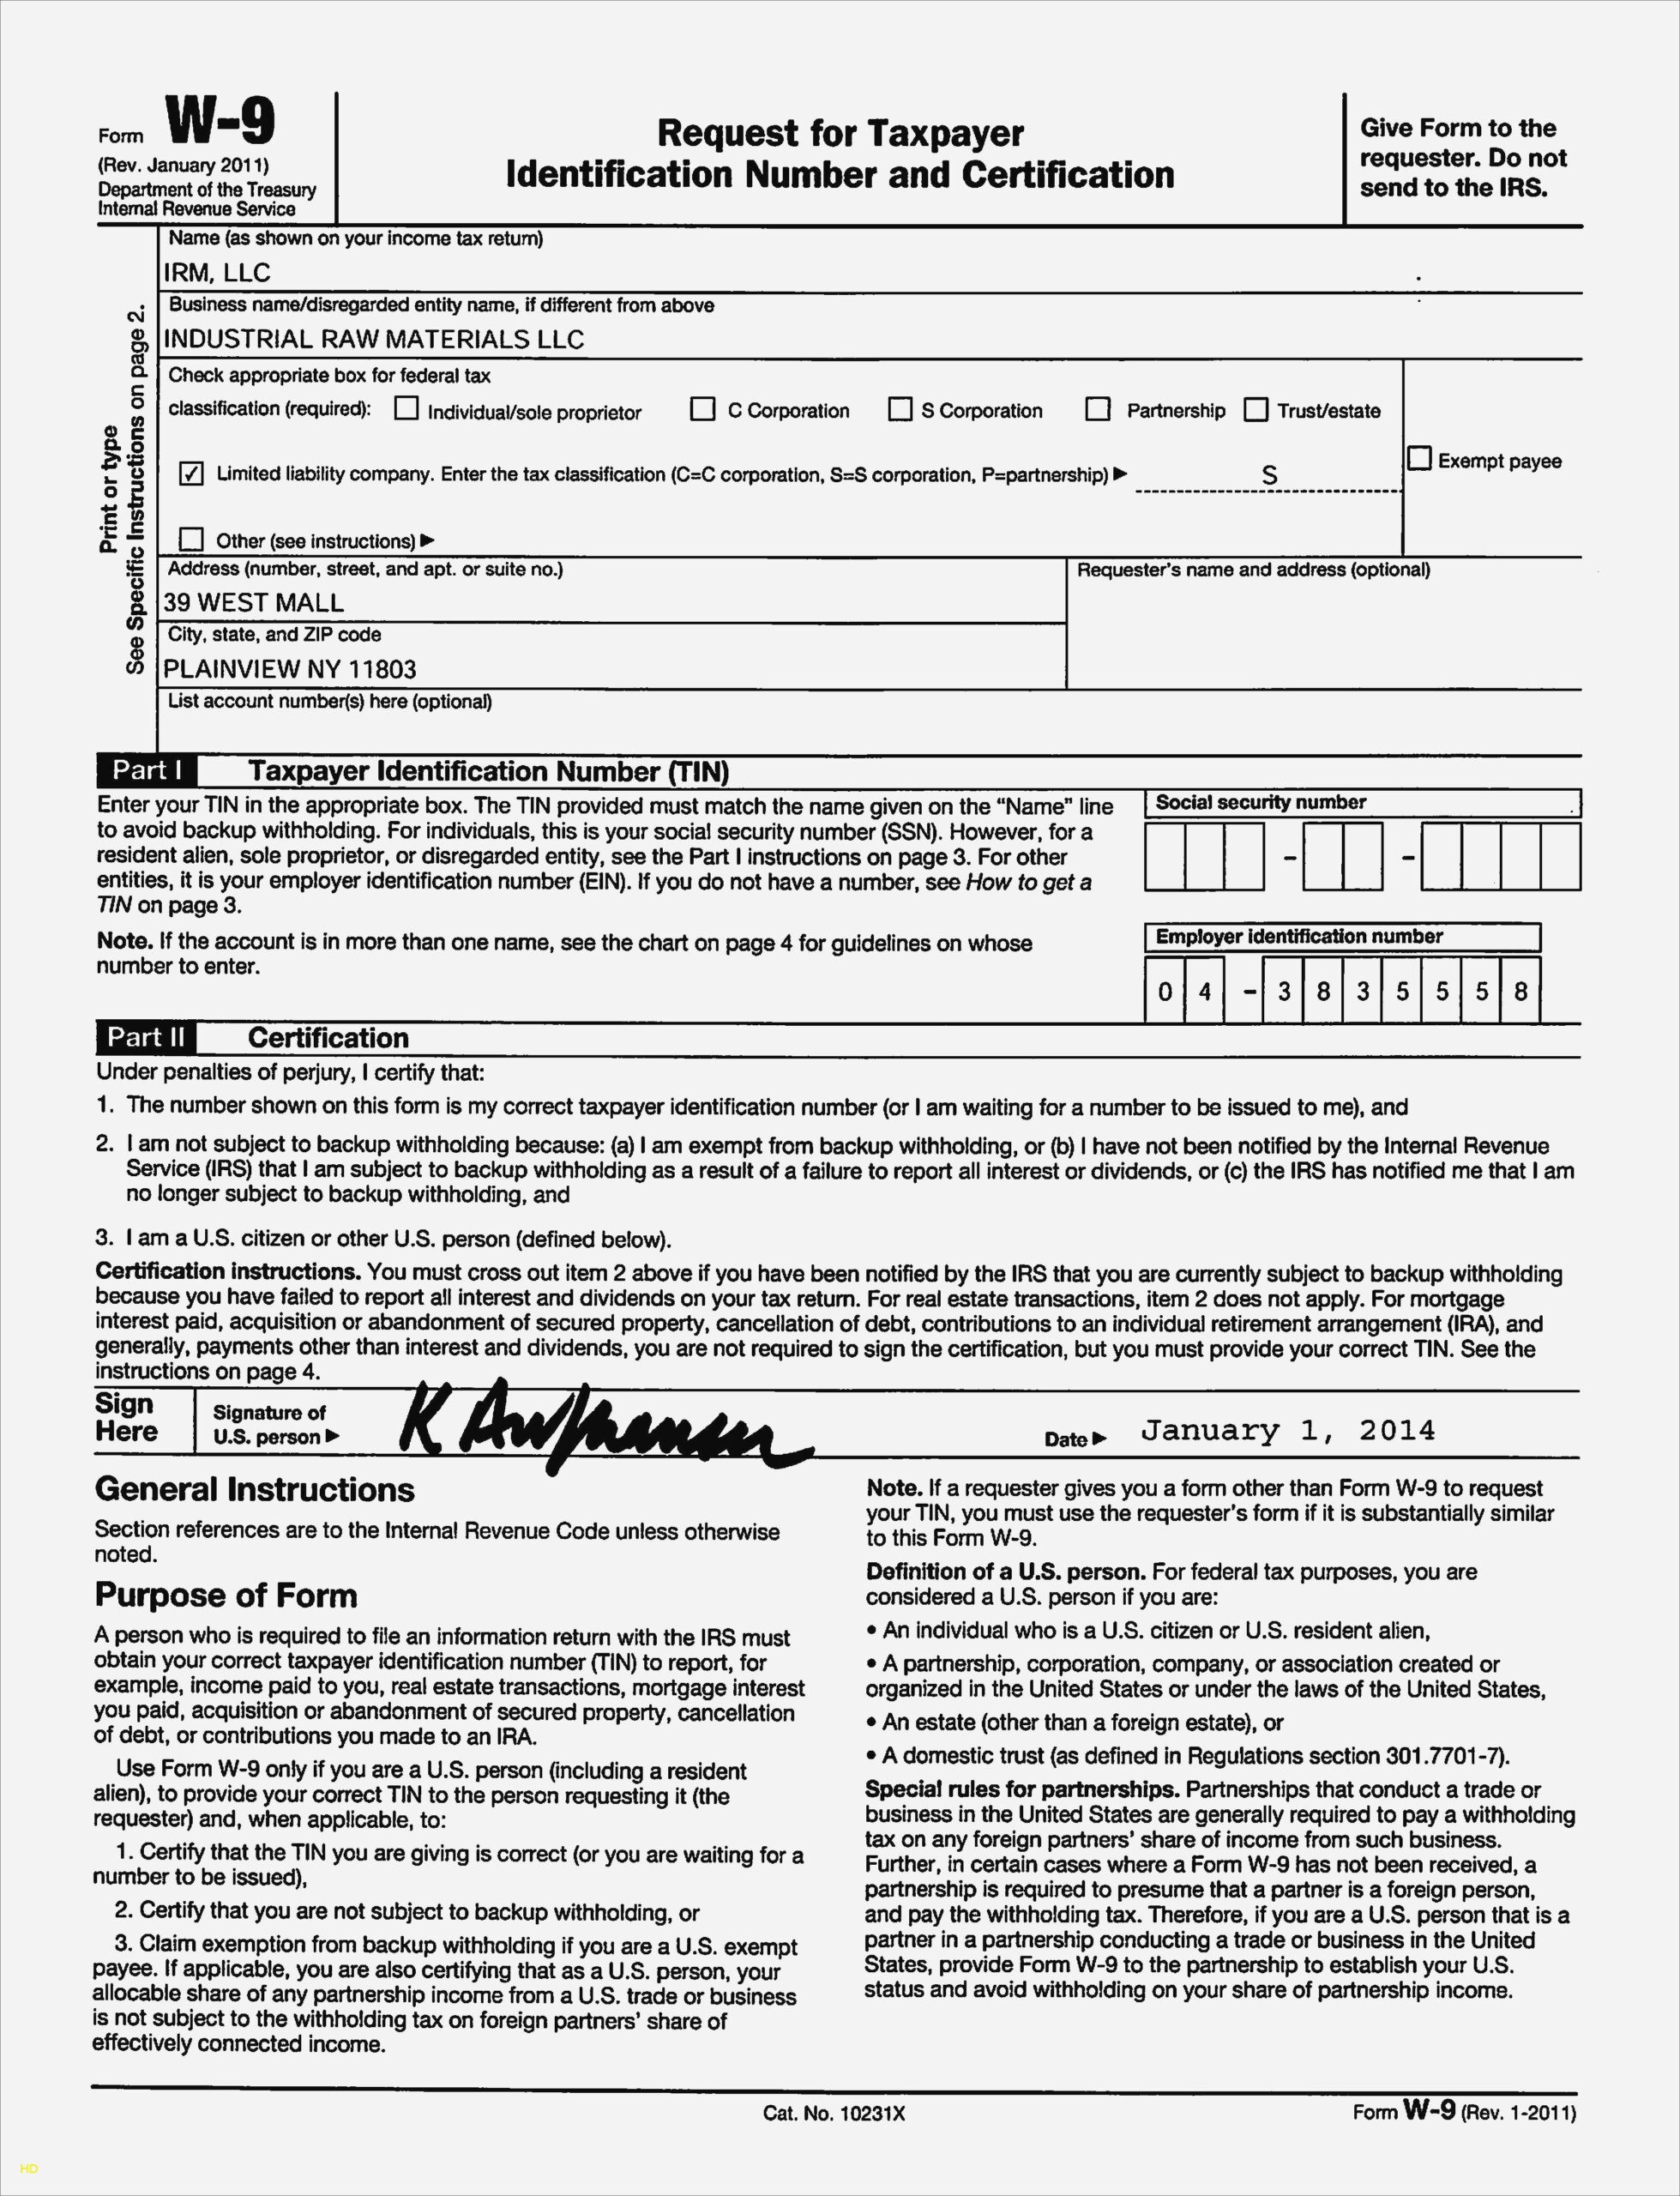 irs-form-w-9-fillable-online